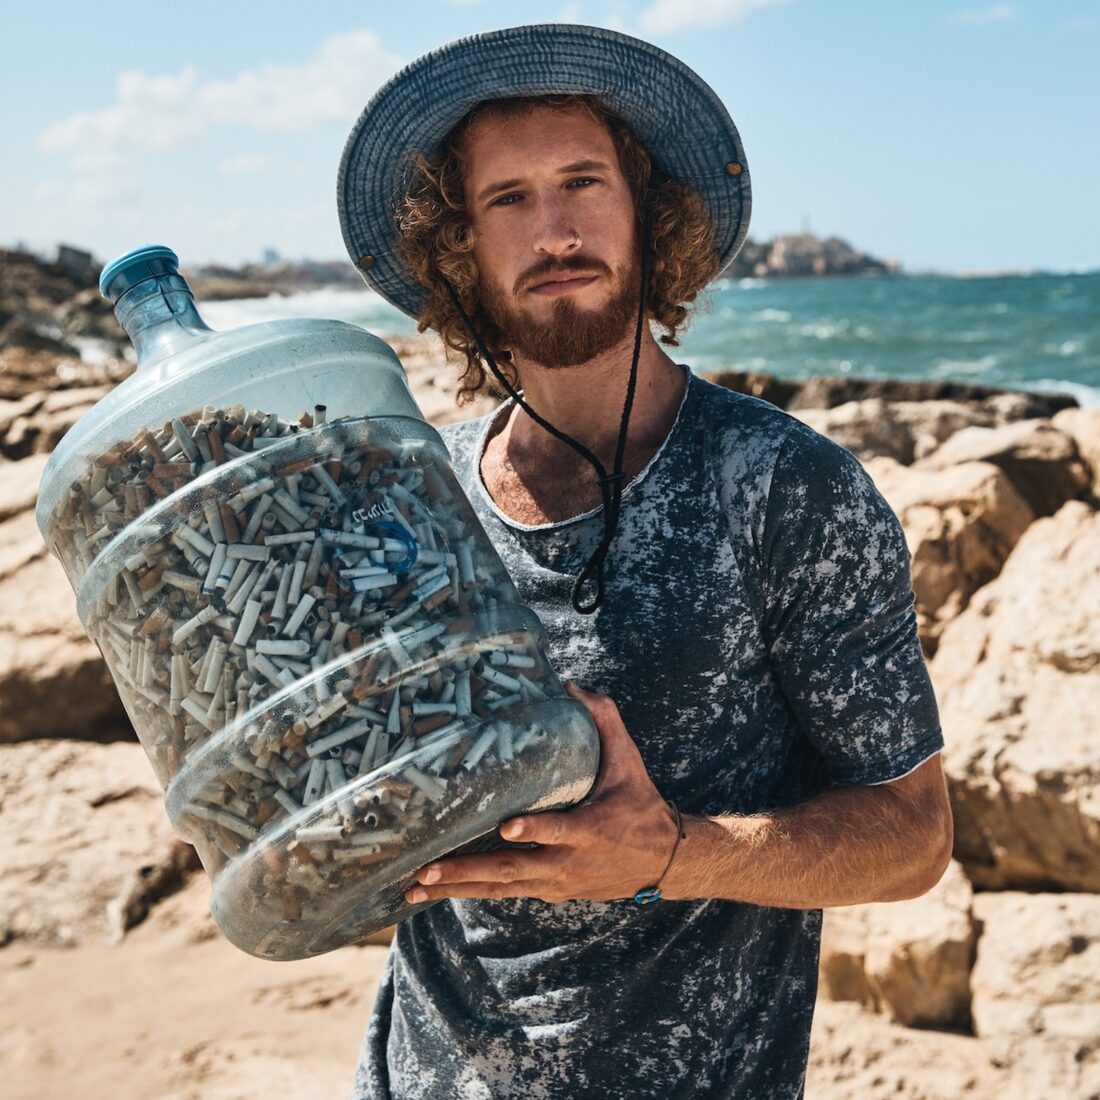 Julian Melcer with cigarette butts collected from Israelâ€™s parks and beaches. Photo by Yossi Michaeli